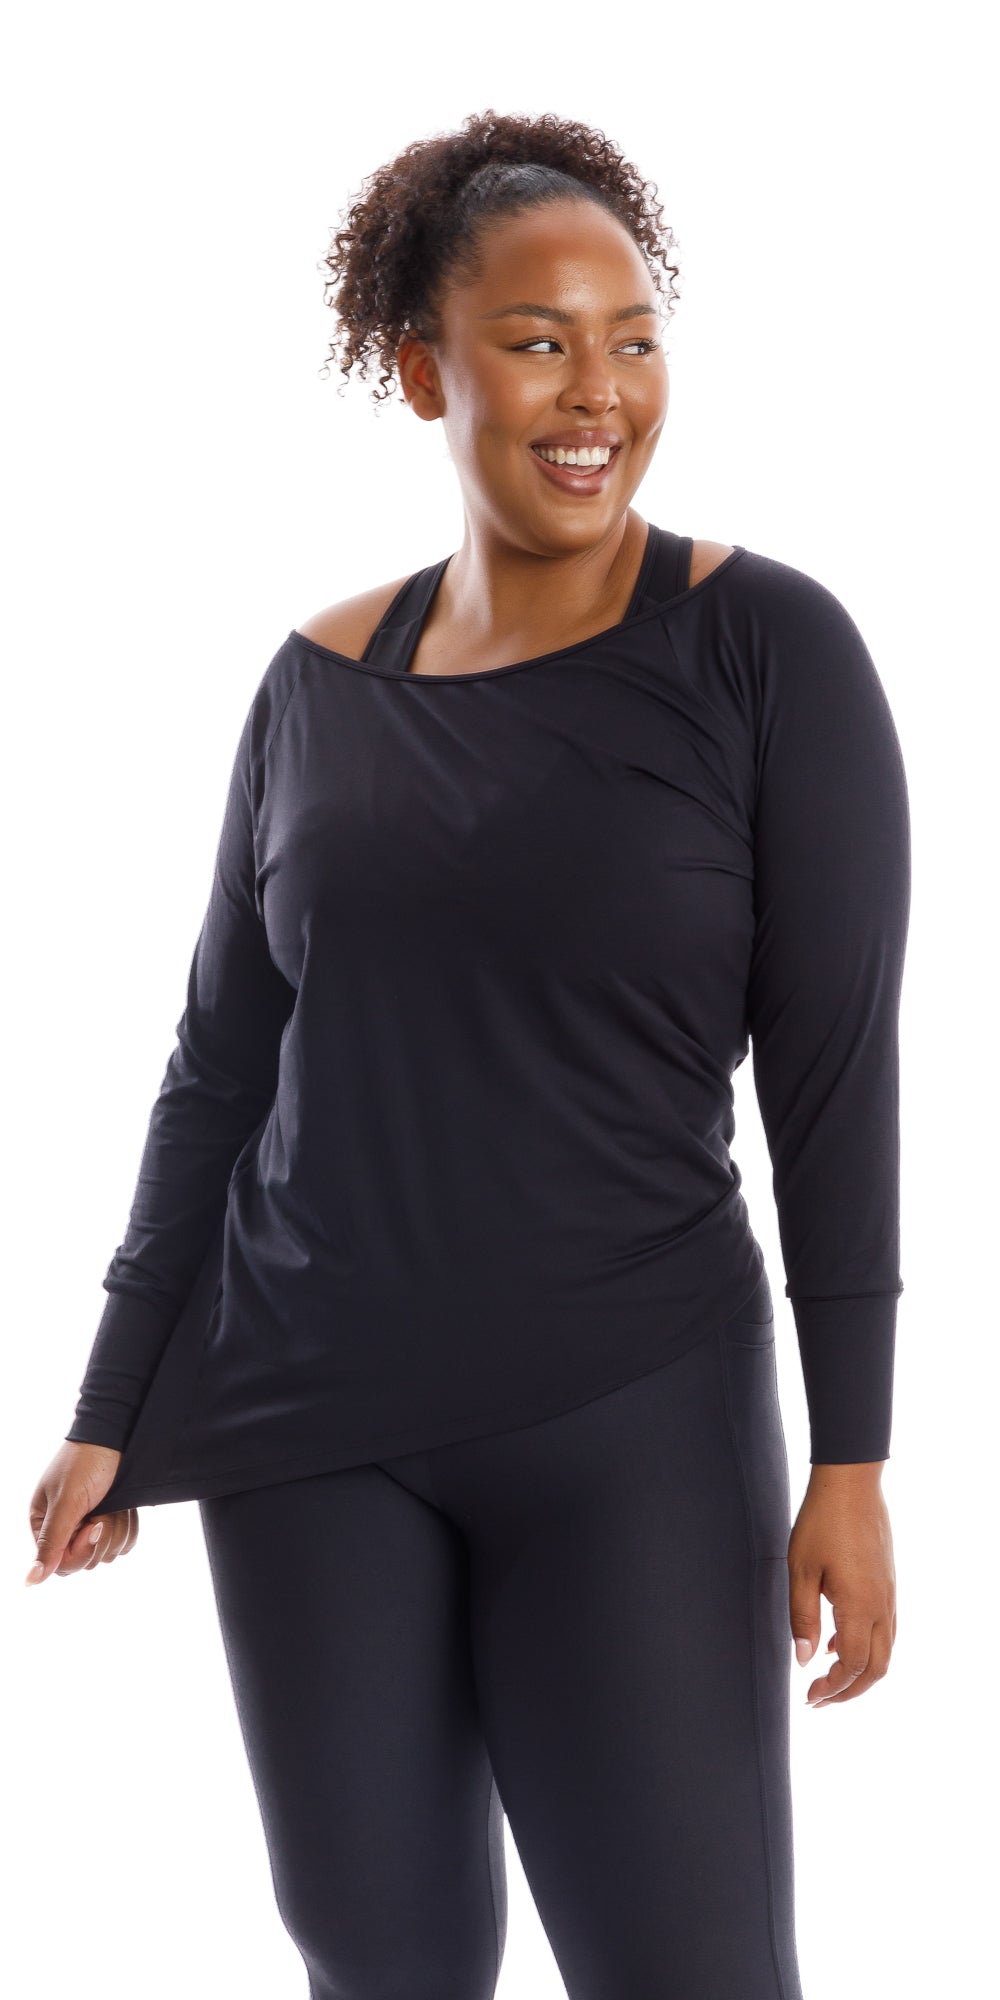 Front view of smiling girl wearing black Midnight Off The Shoulder Long Sleeve Tee and matching bottoms holding the end of her shirt